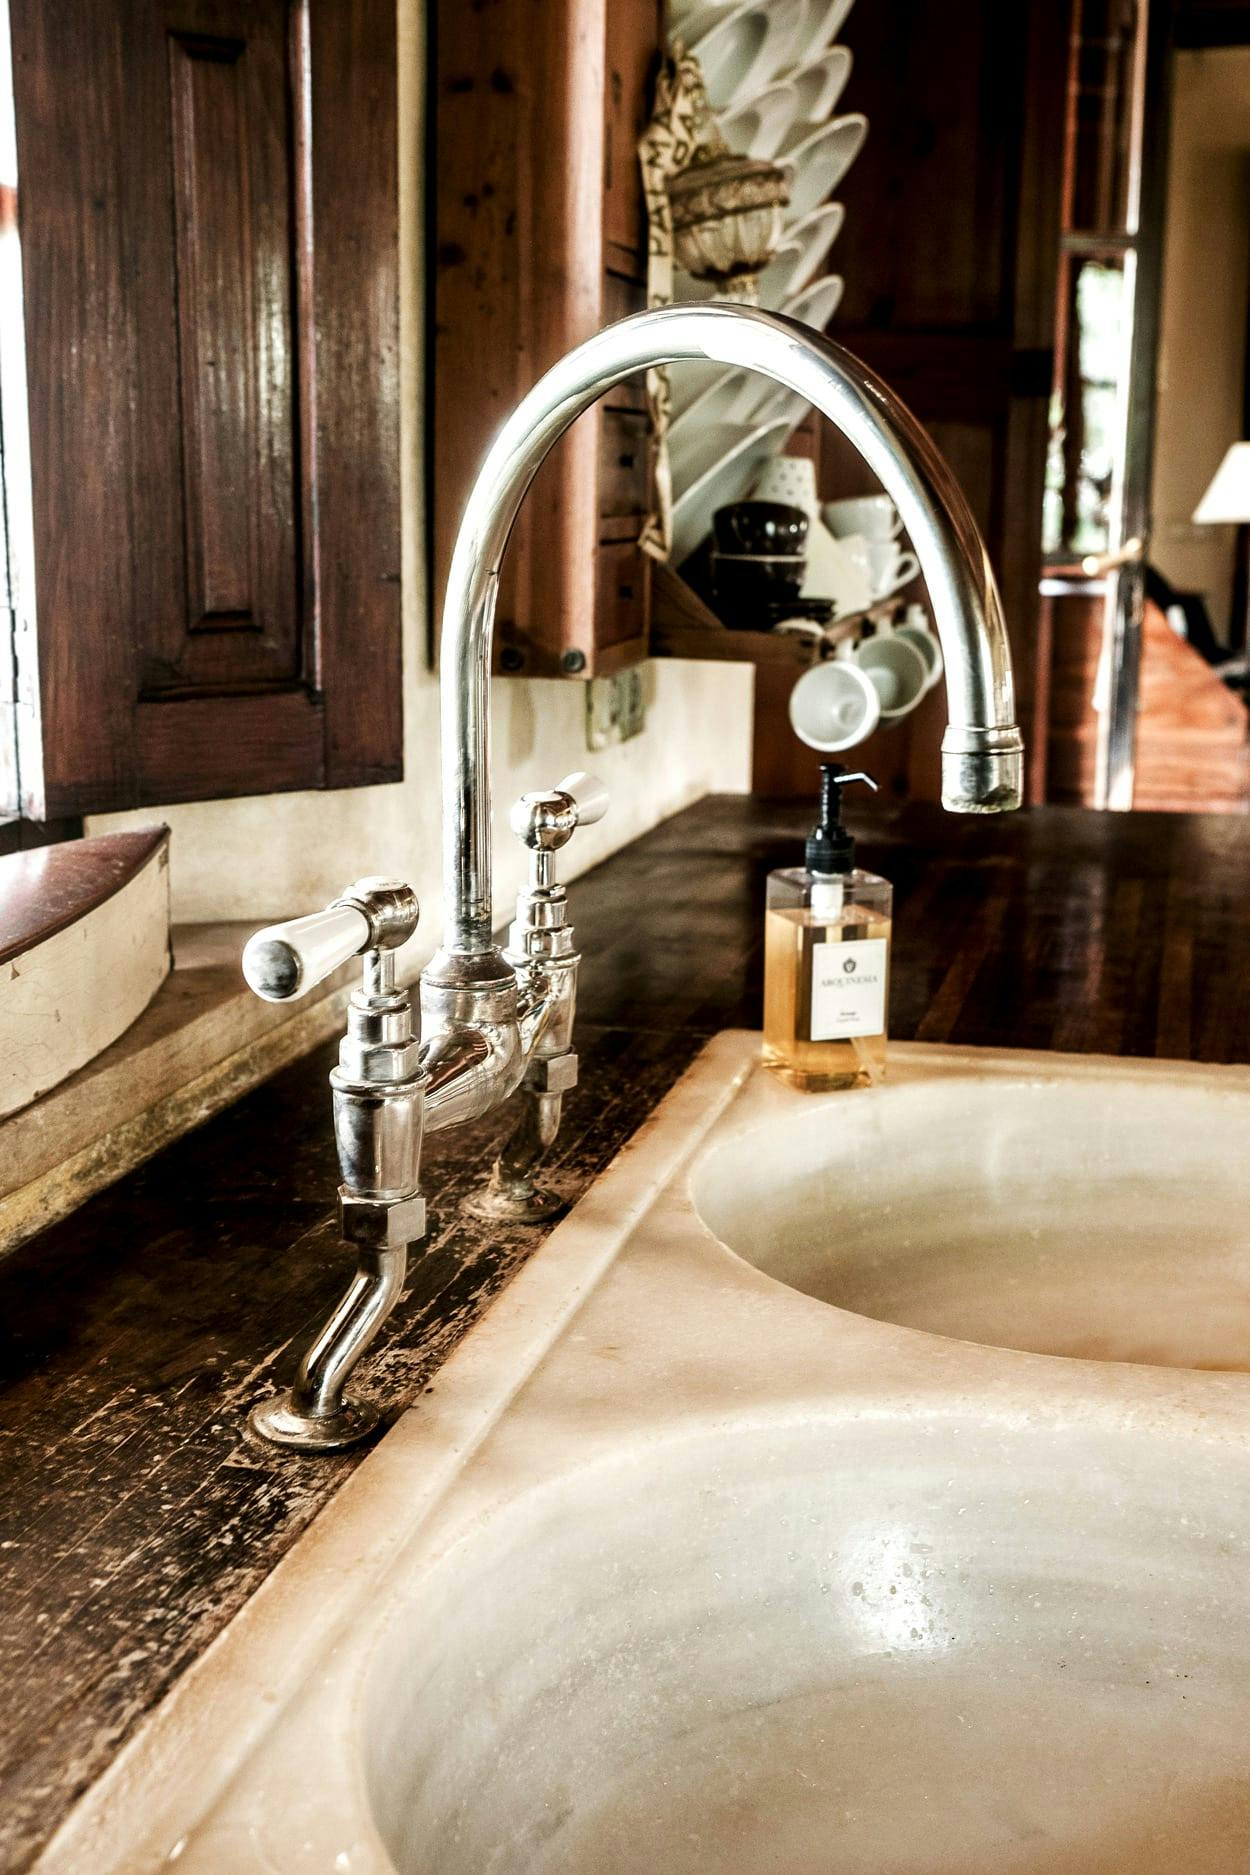 The image features a bathroom with a large, white sink and a marble countertop.